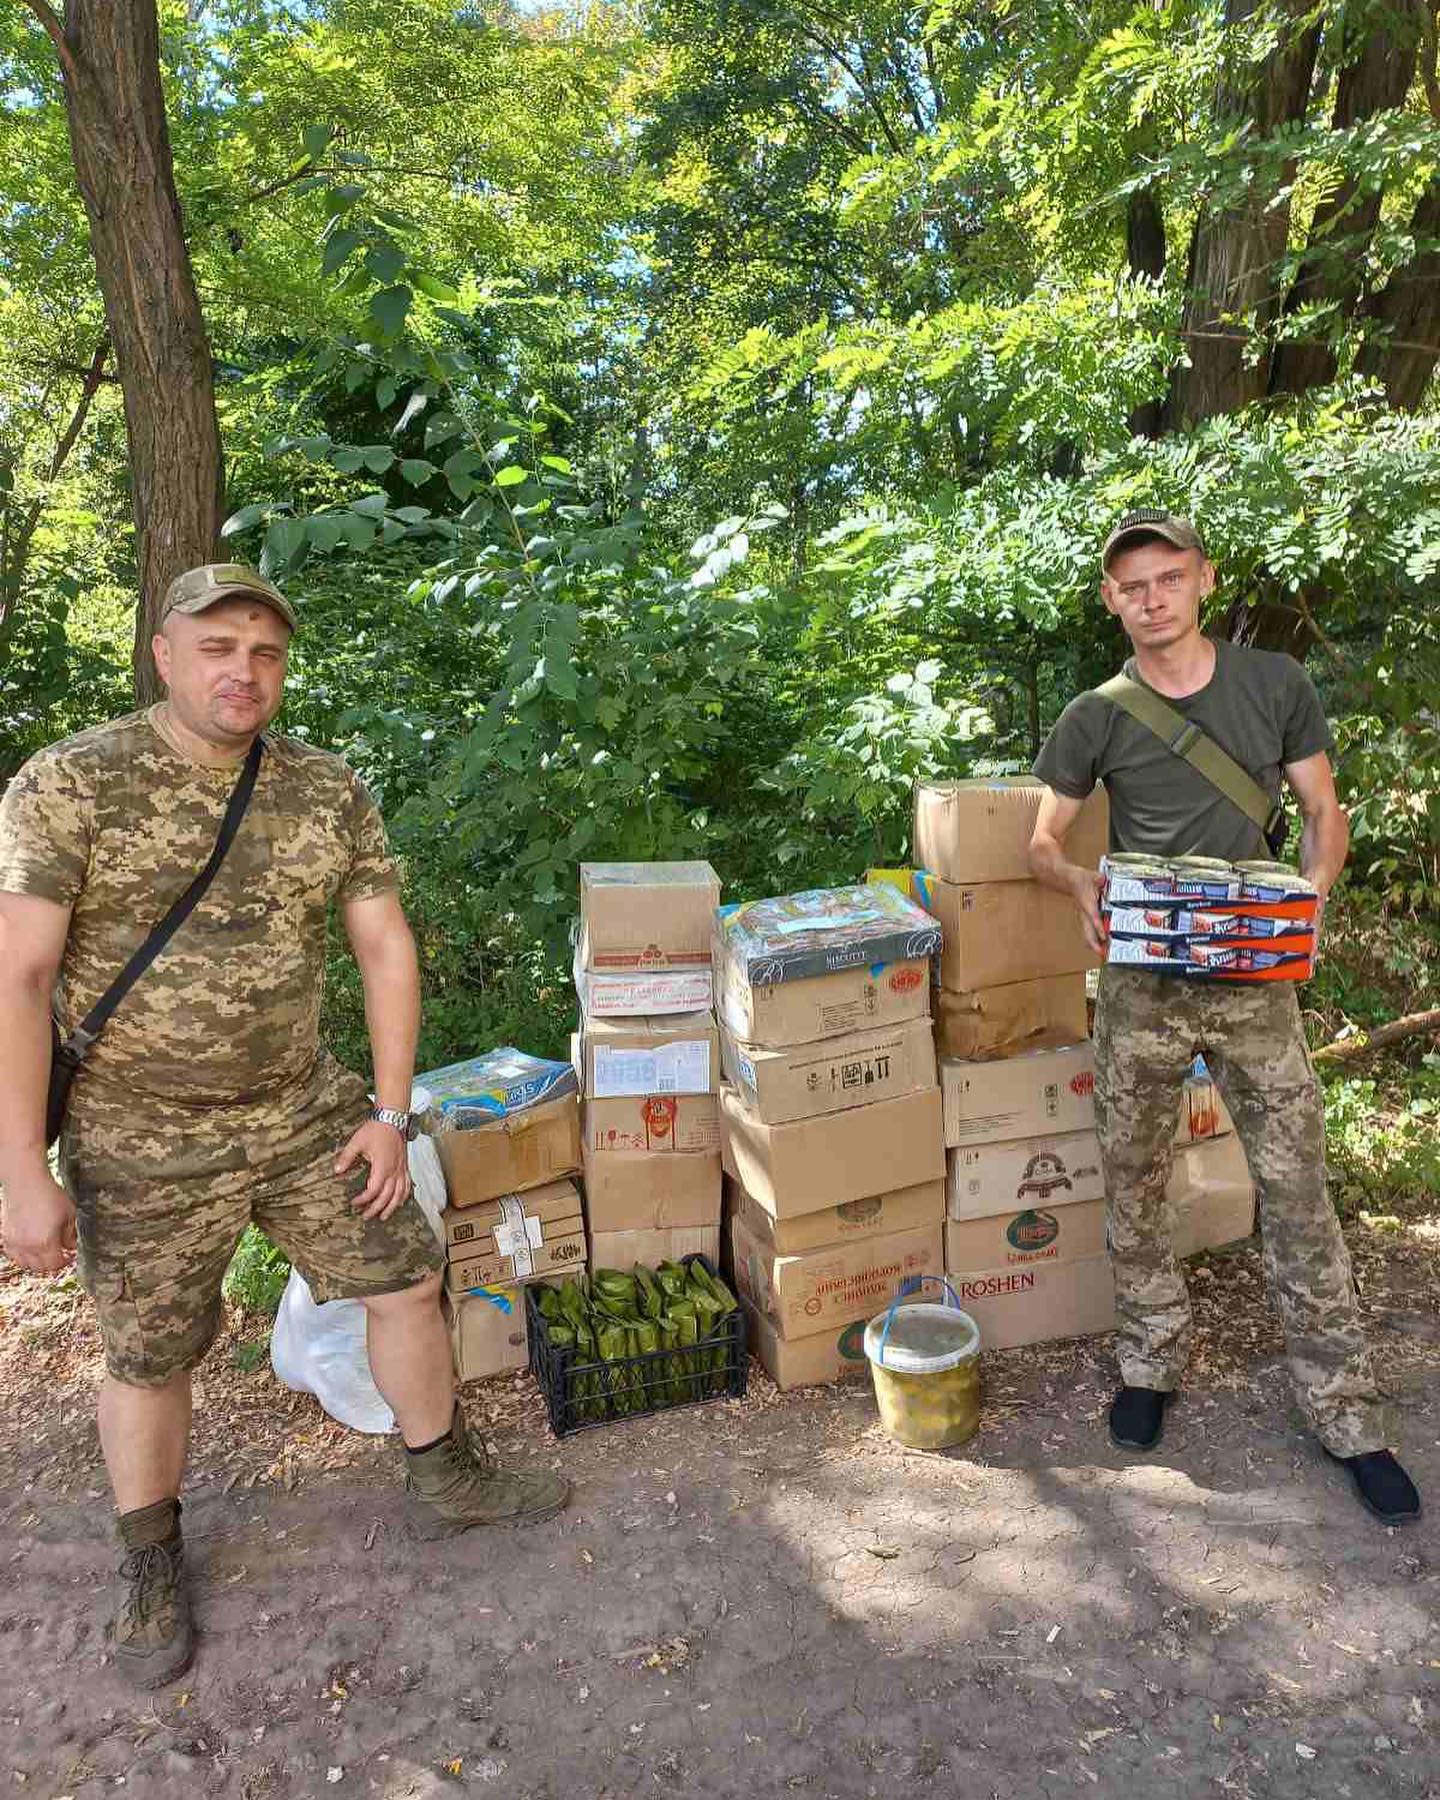 Two men in camouflage standing next to boxes of food.